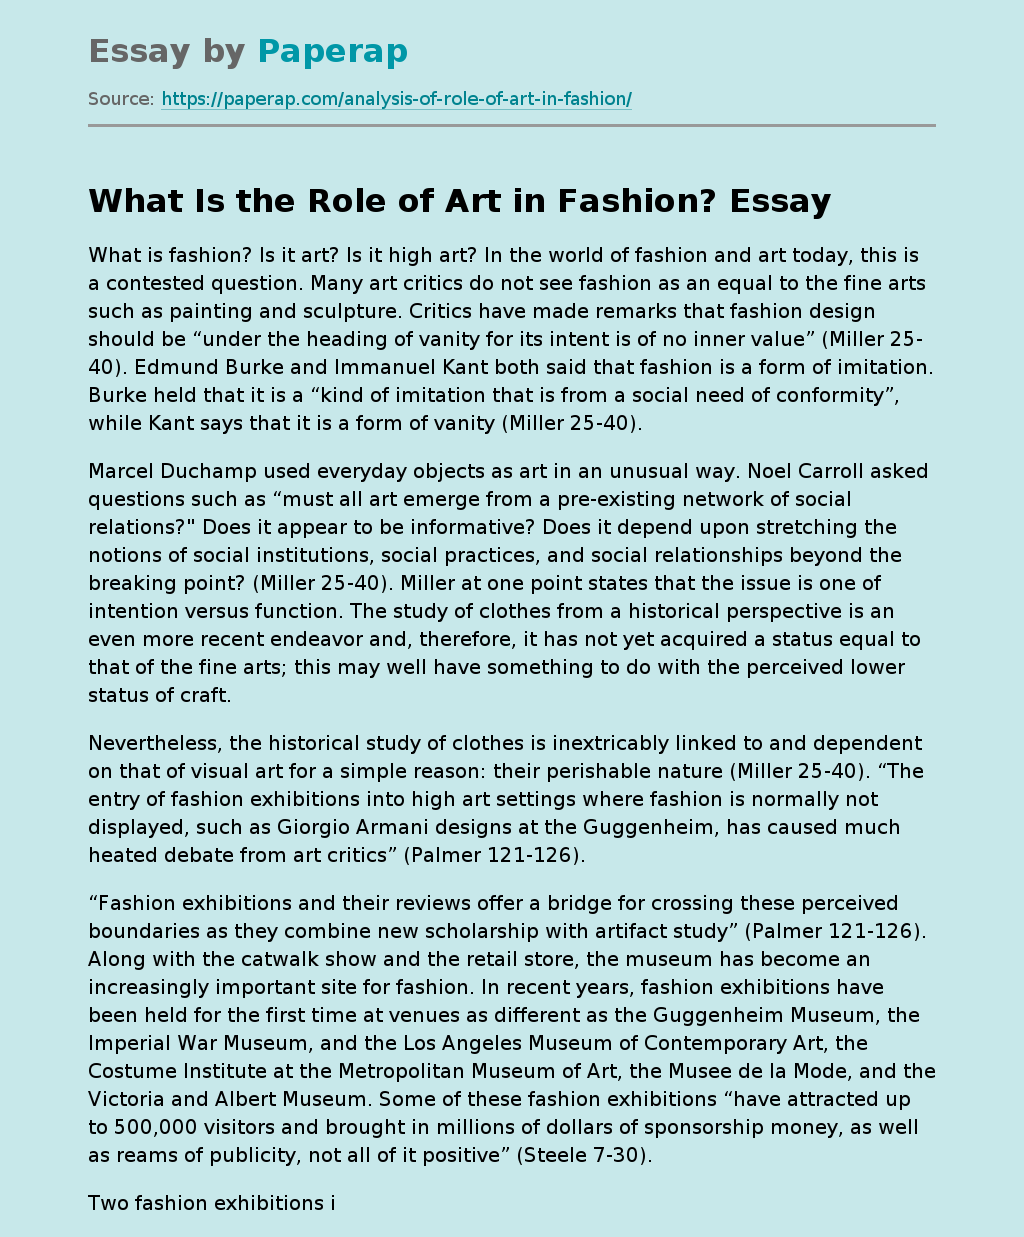 What Is the Role of Art in Fashion?